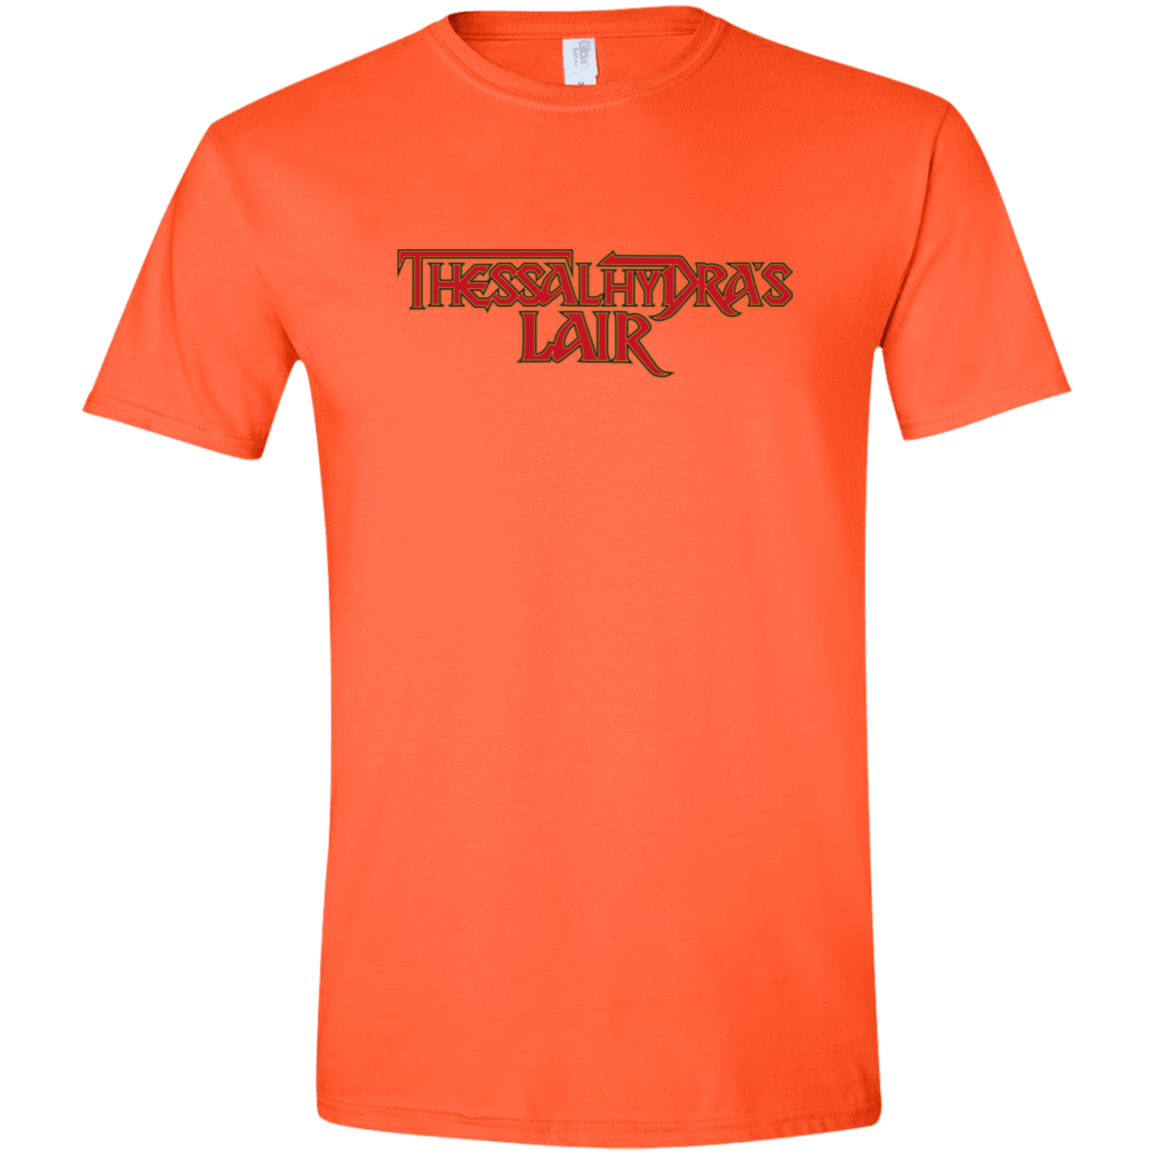 T-Shirts Orange / S Thessalhydras Lair Men's Semi-Fitted Softstyle